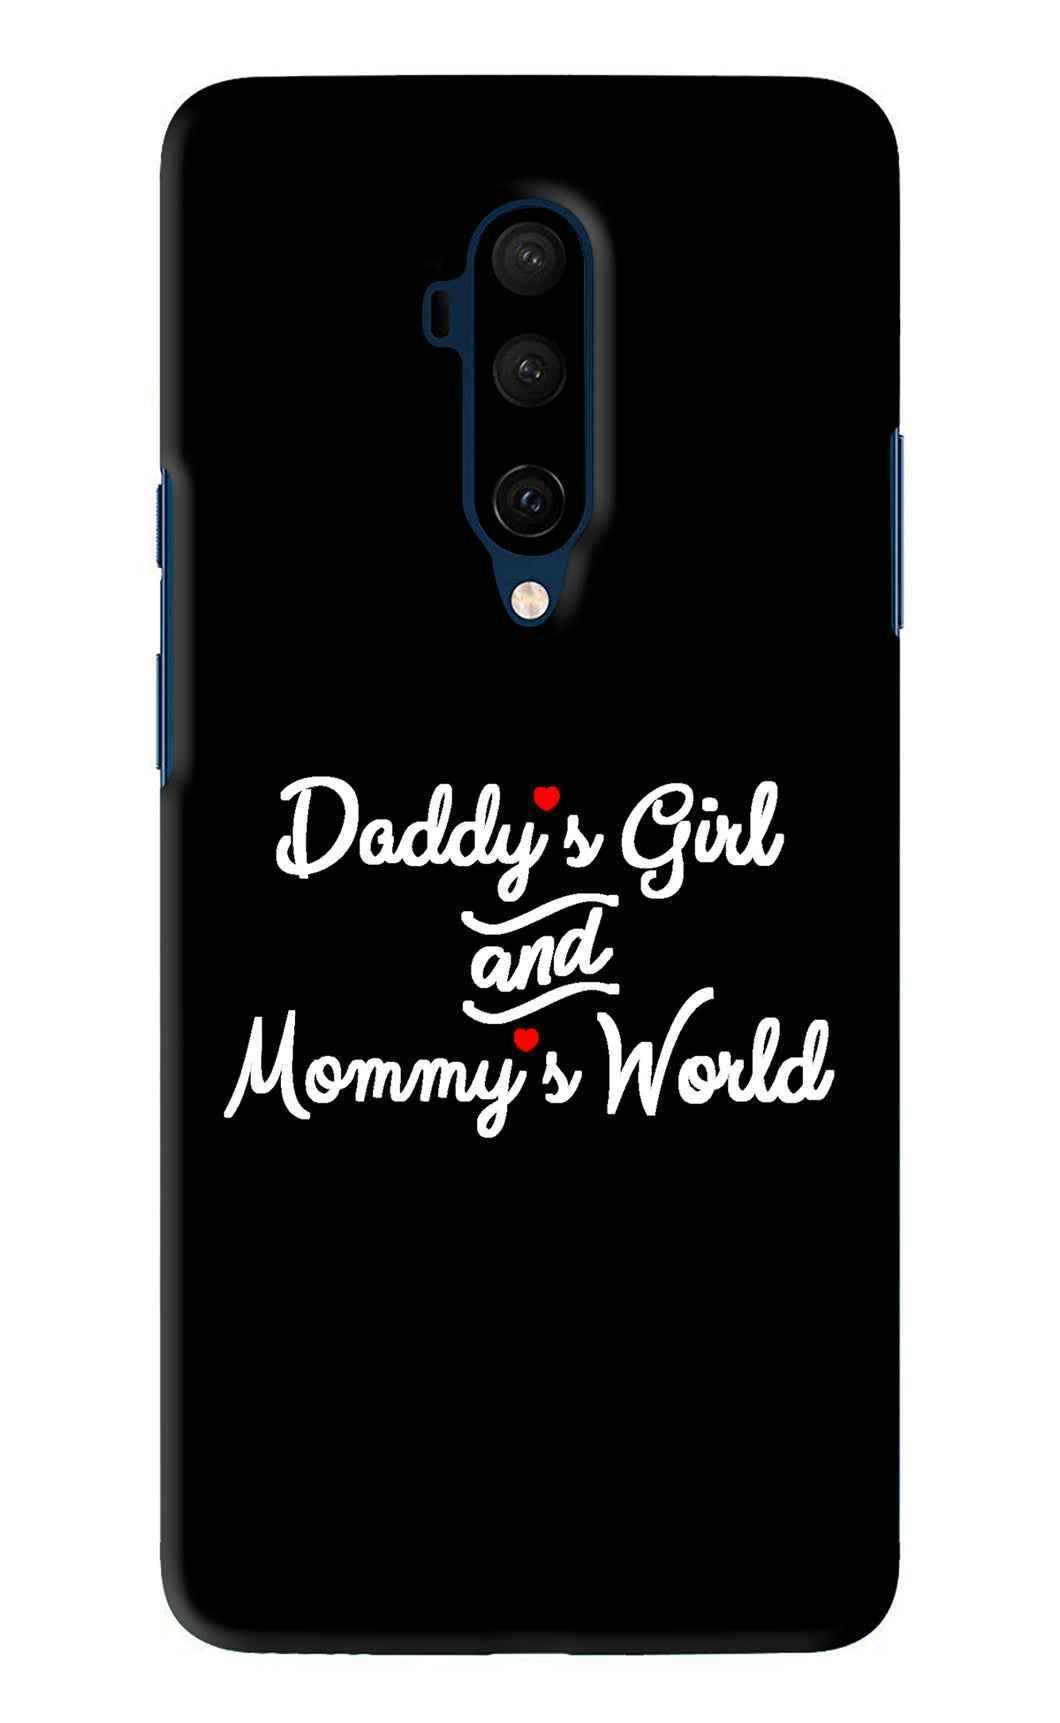 Daddy's Girl and Mommy's World OnePlus 7T Pro Back Skin Wrap